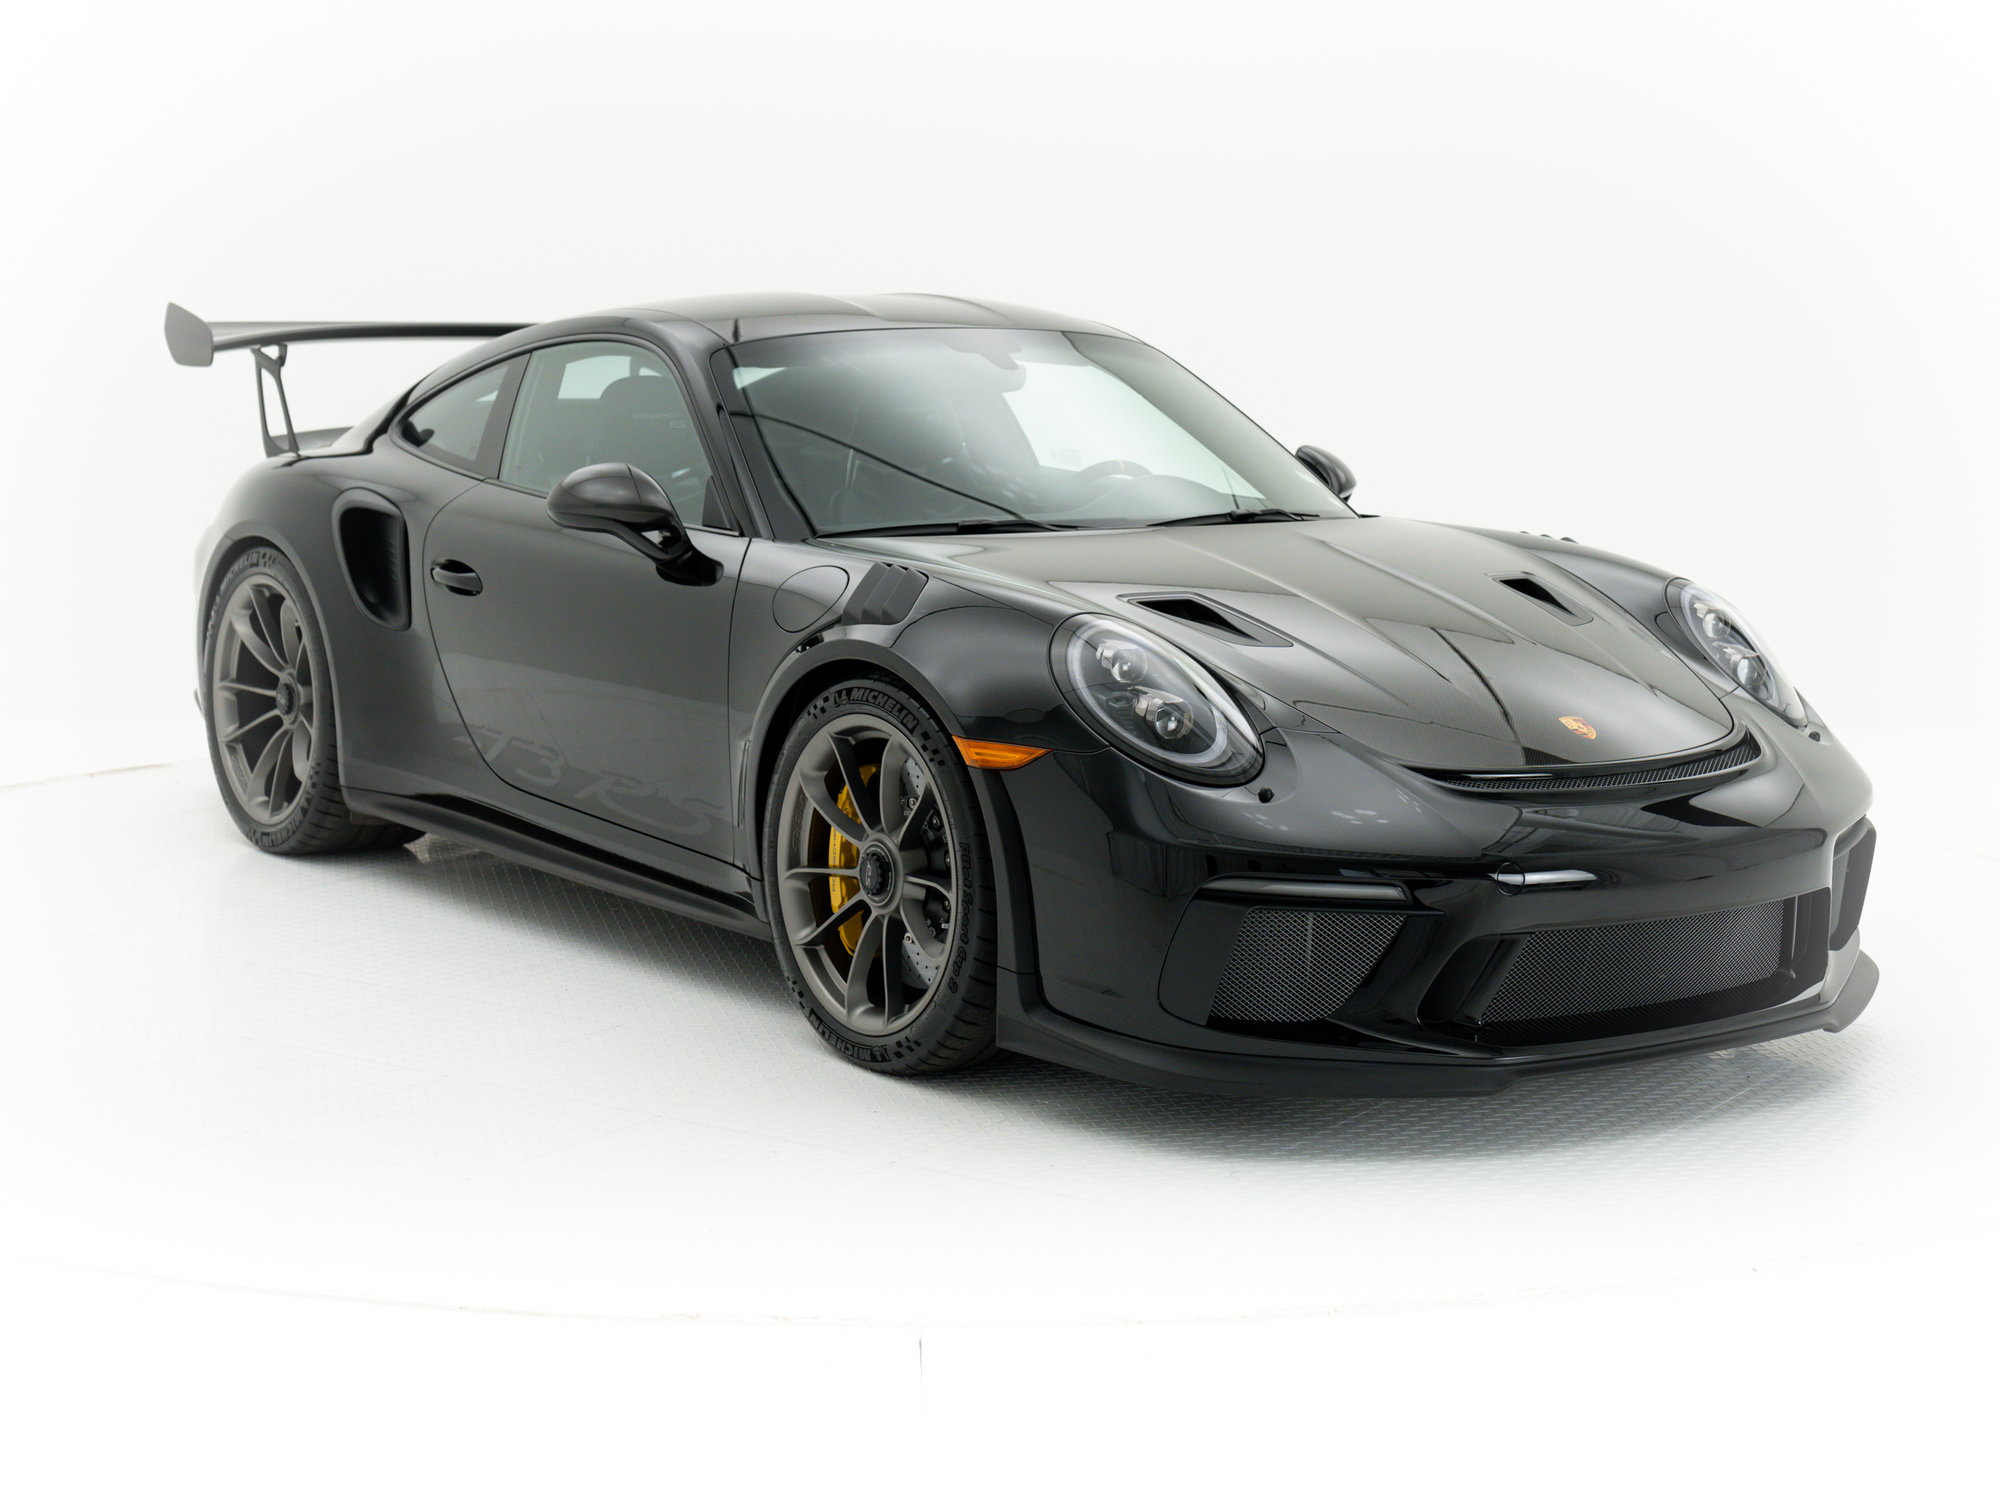 2019 Porsche GT3 - CPO: 2019 Porsche GT3 RS Black with Weissach Package - Used - VIN WP0AF2A91KS164330 - 2,025 Miles - 6 cyl - 2WD - Automatic - Coupe - Black - Beaverton, OR 97005, United States